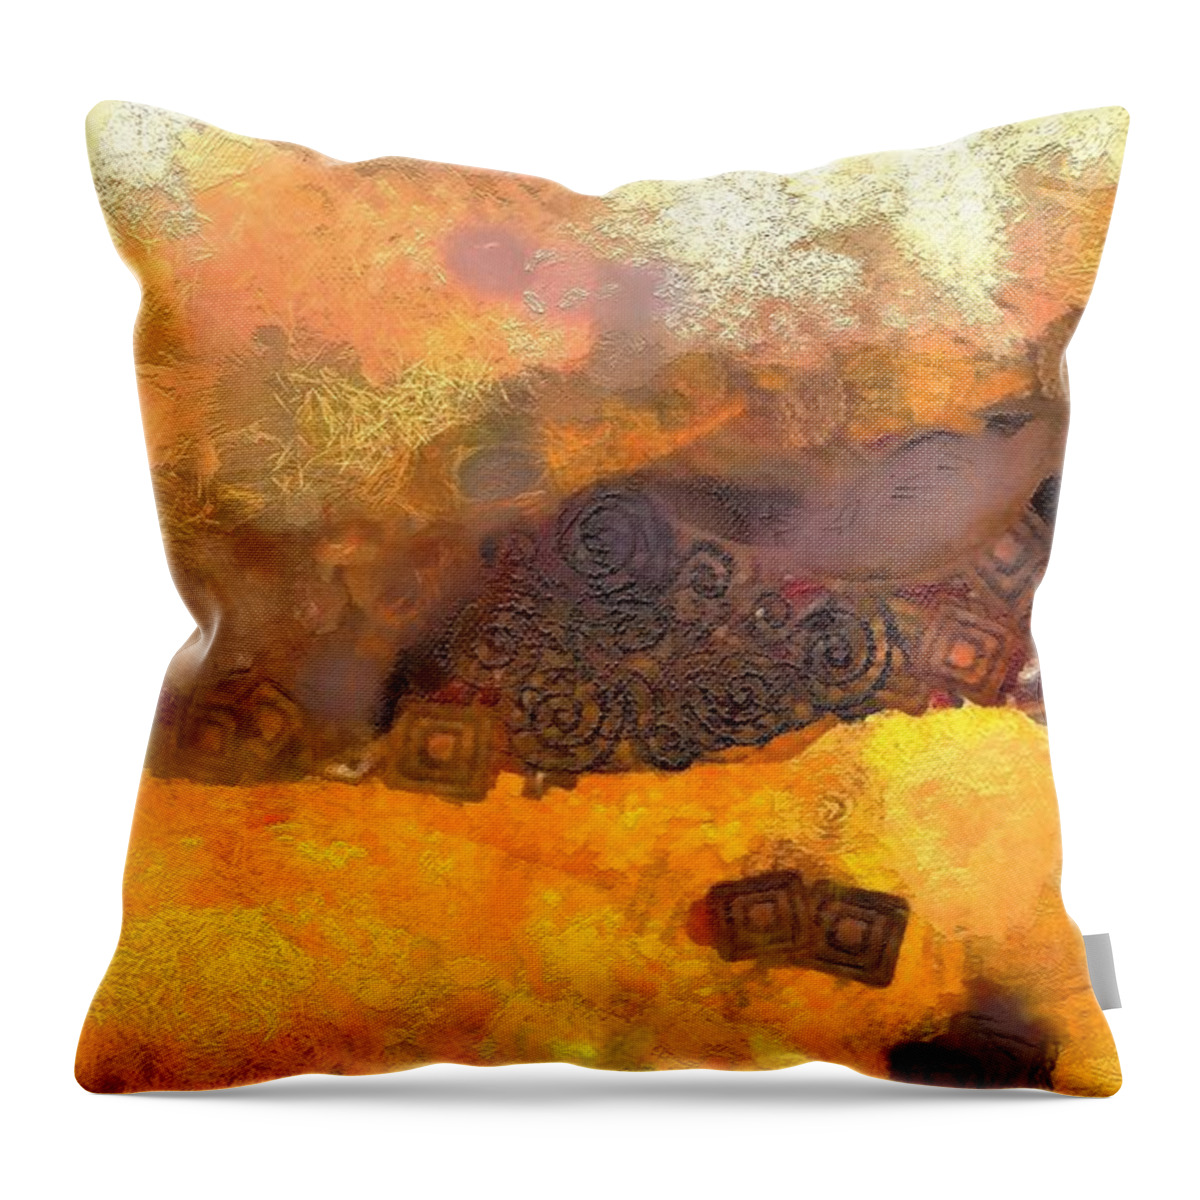 Abstract Throw Pillow featuring the painting Klimpt Study No. 1 by Lelia DeMello